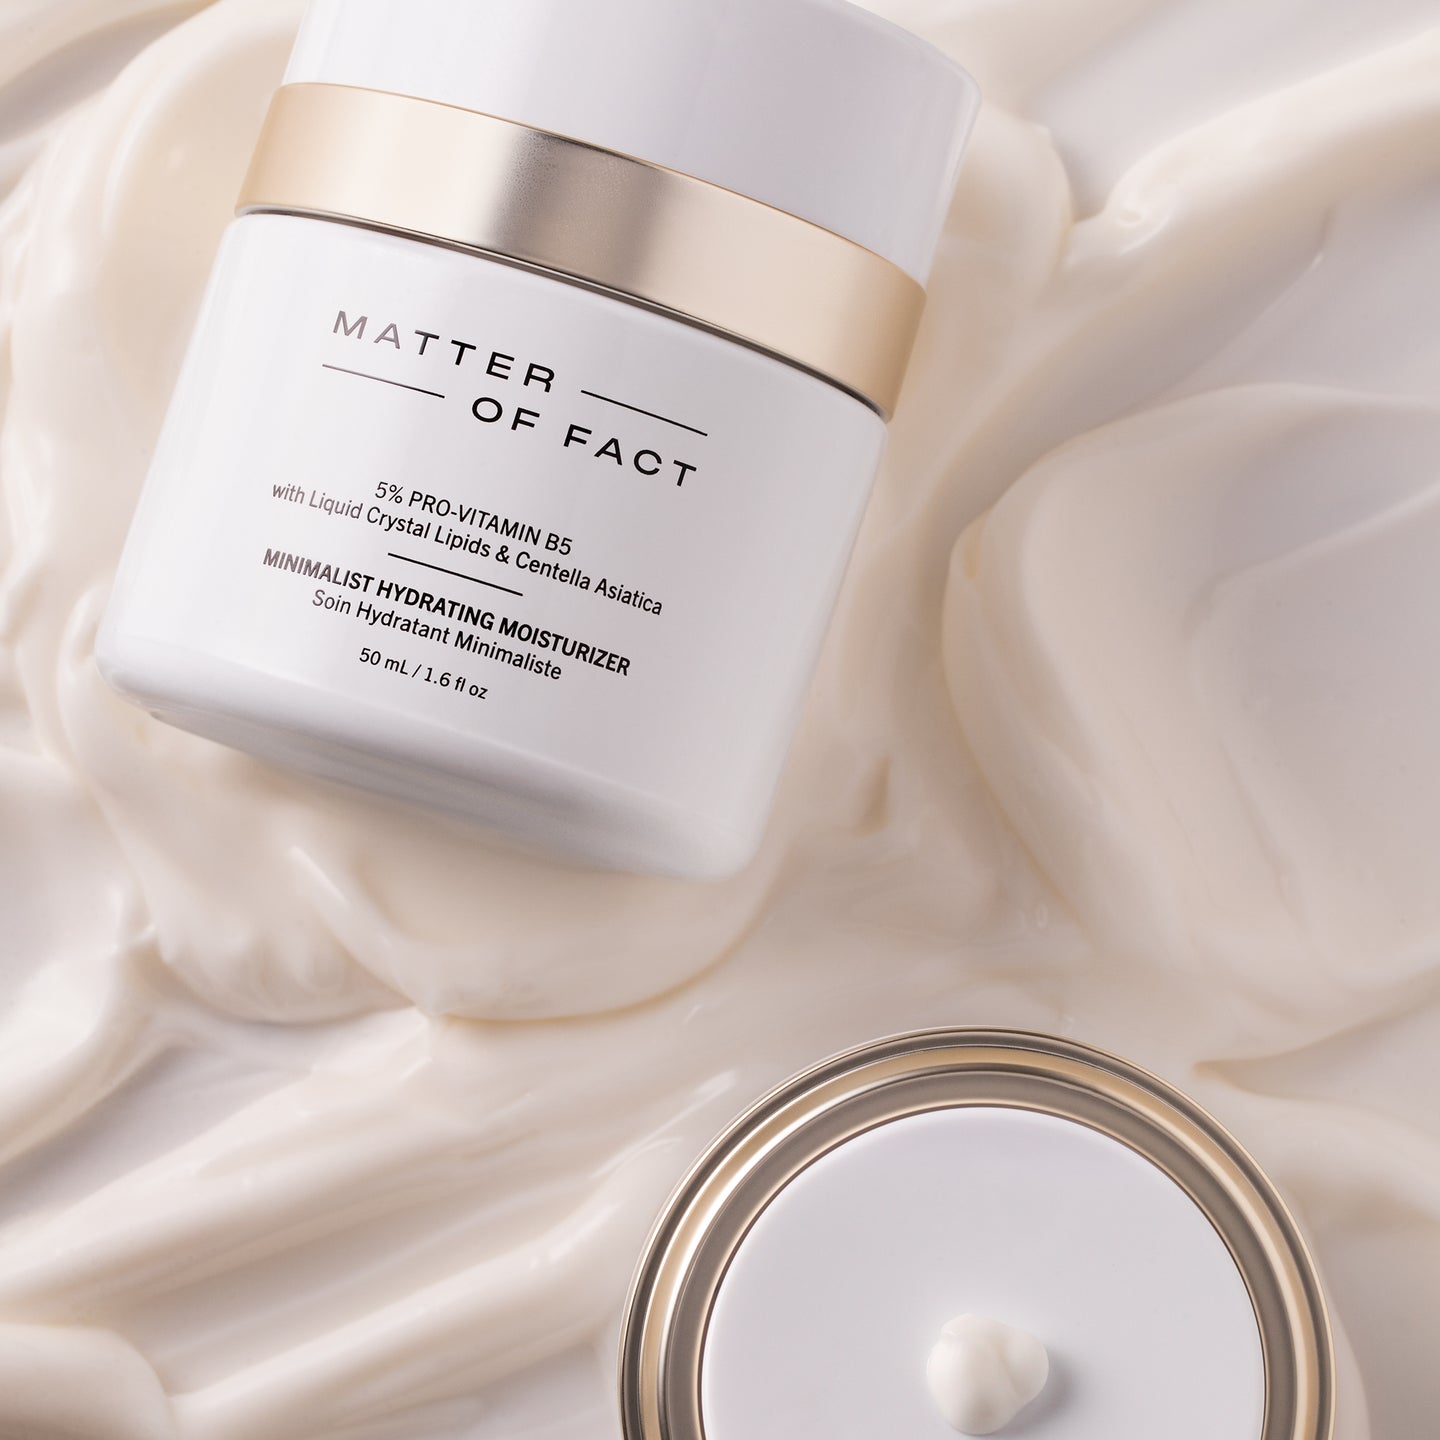 MATTER OF FACT SKINCARE MINIMALIST HYDRATING MOISTURIZER product vessel on top of product texture